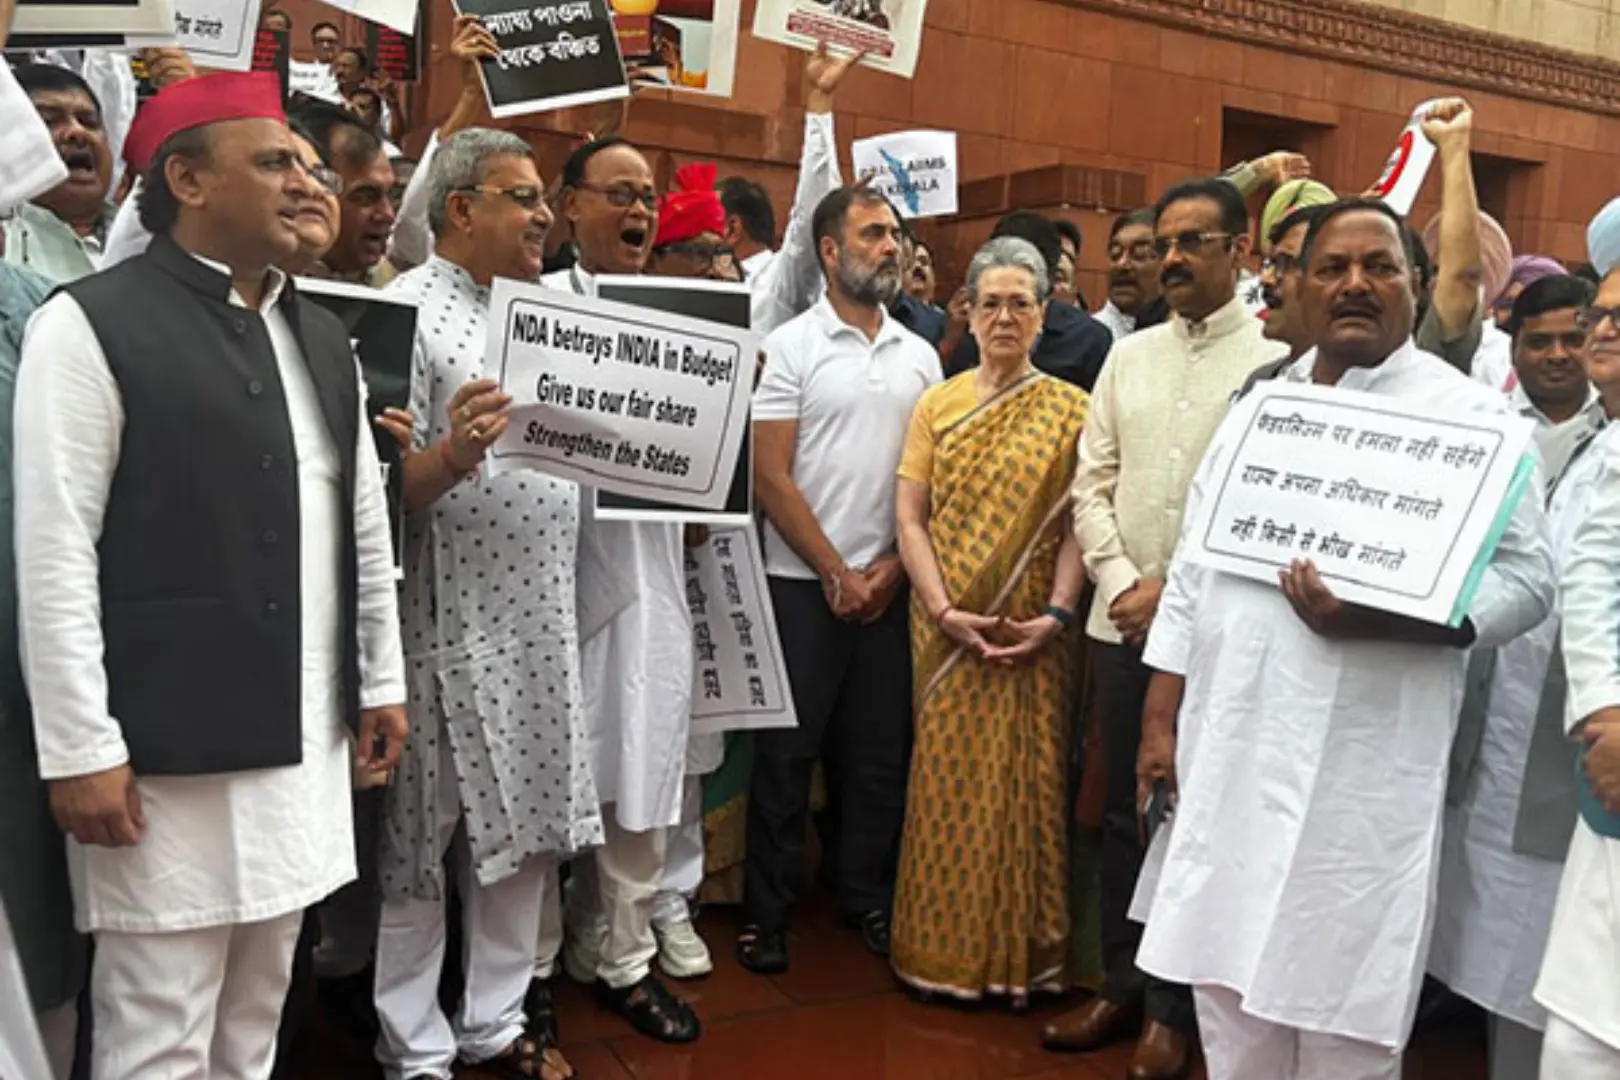 Opposition leaders claim that "compulsion of government visible in Budget" as the INDIA bloc objects to the budget.